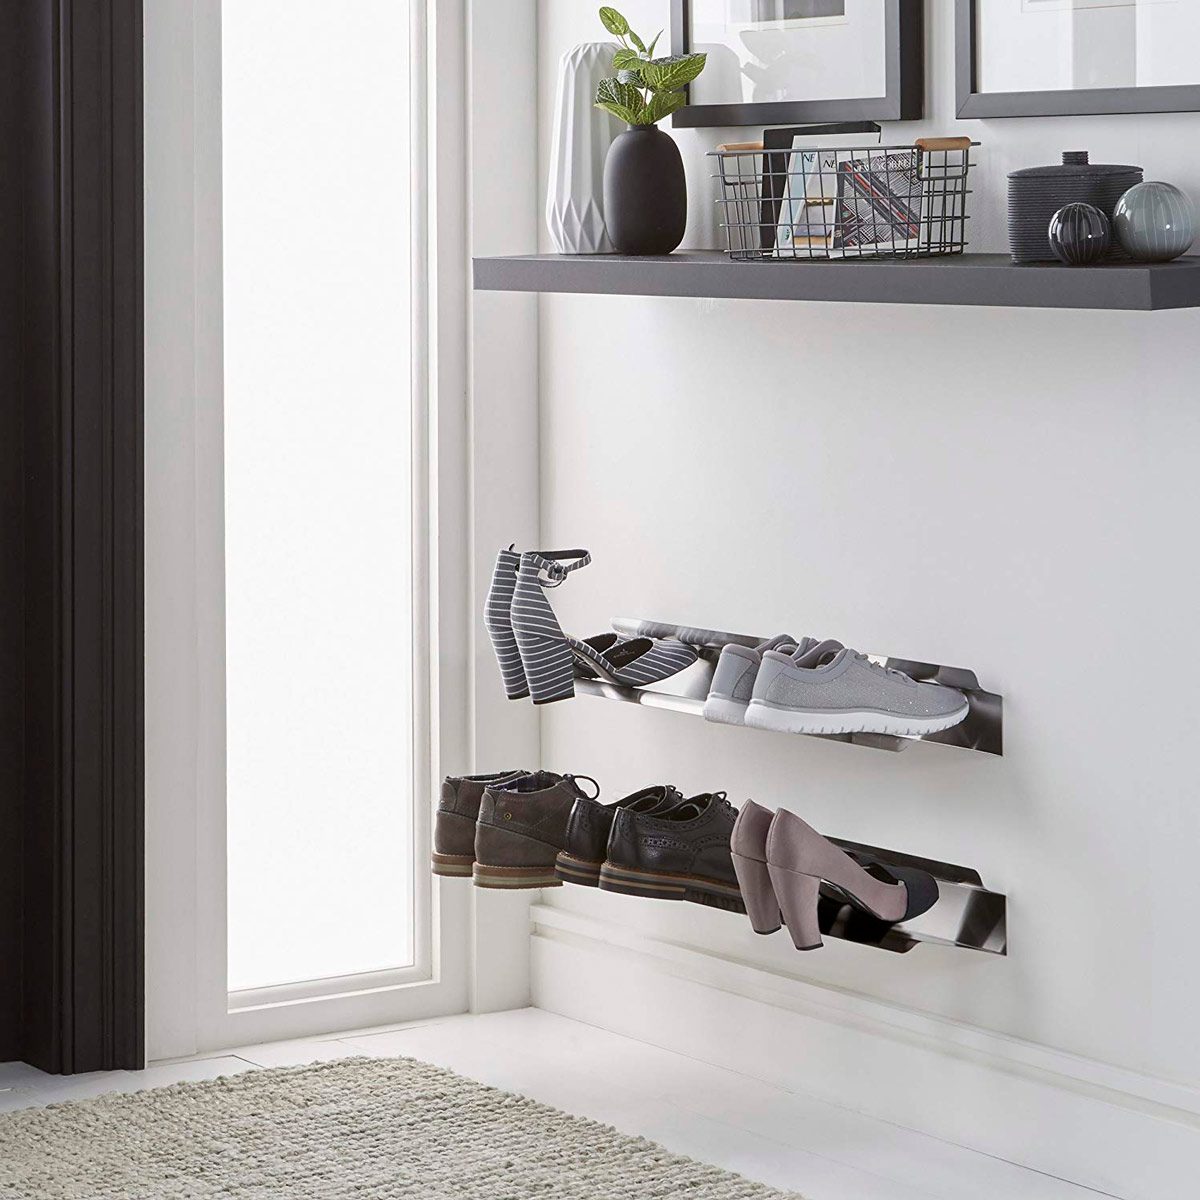 Our Best Shoe Storage Ideas for Your Closet, Entryway, and More